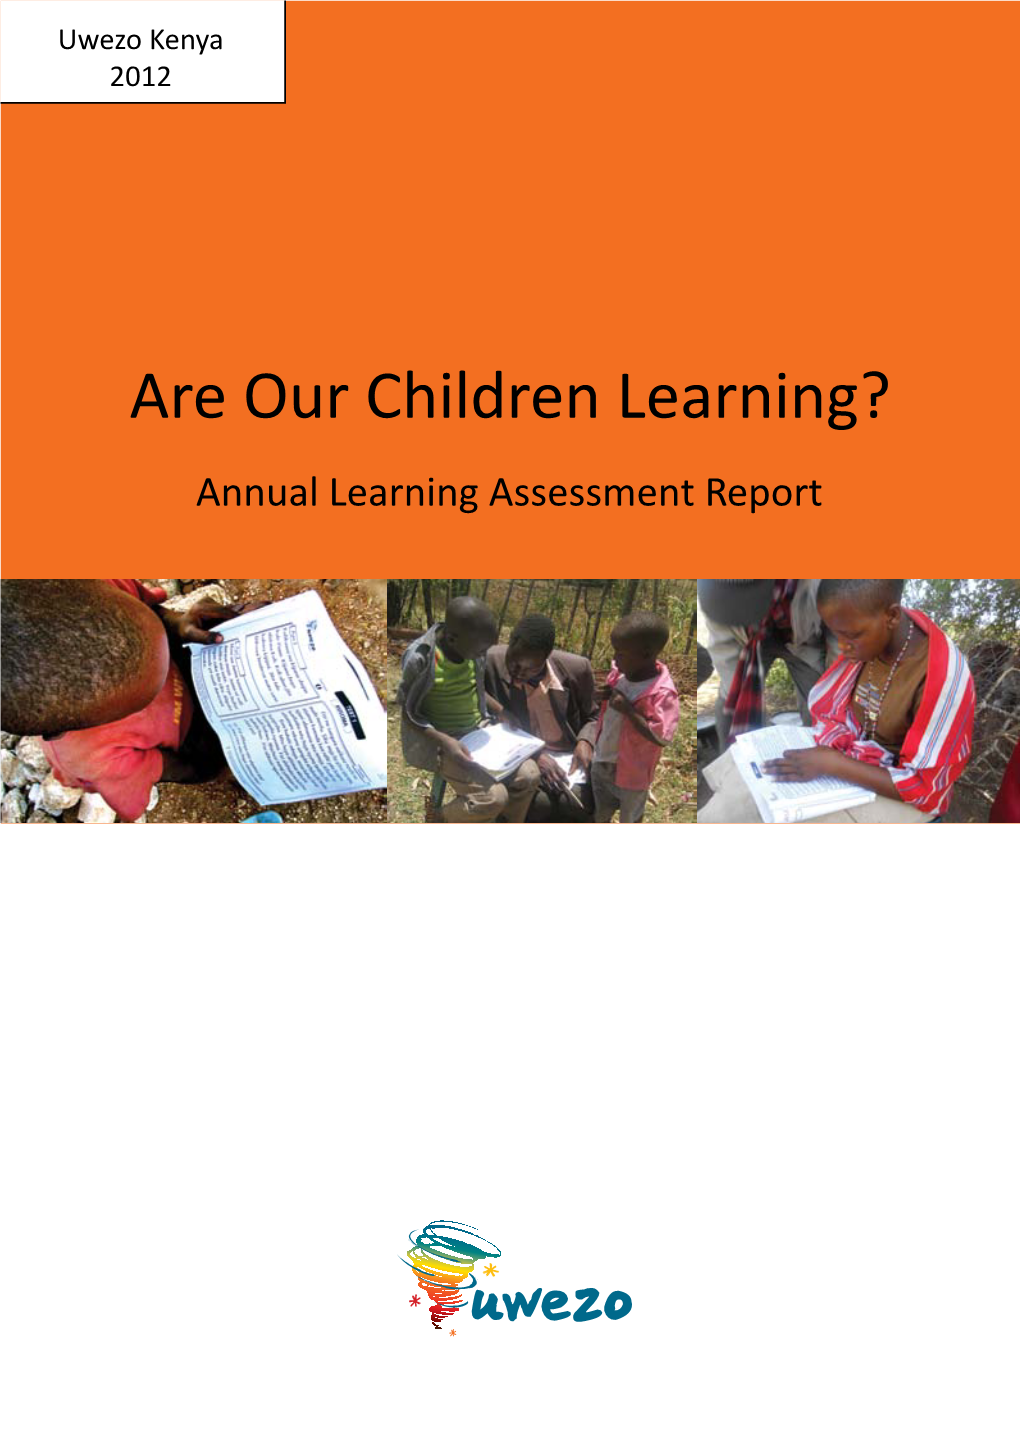 Are Our Children Learning? Annual Learning Assessment Report Uwezo Is an East African Initiative, with Overall Quality Assurance and Management Support from Twaweza